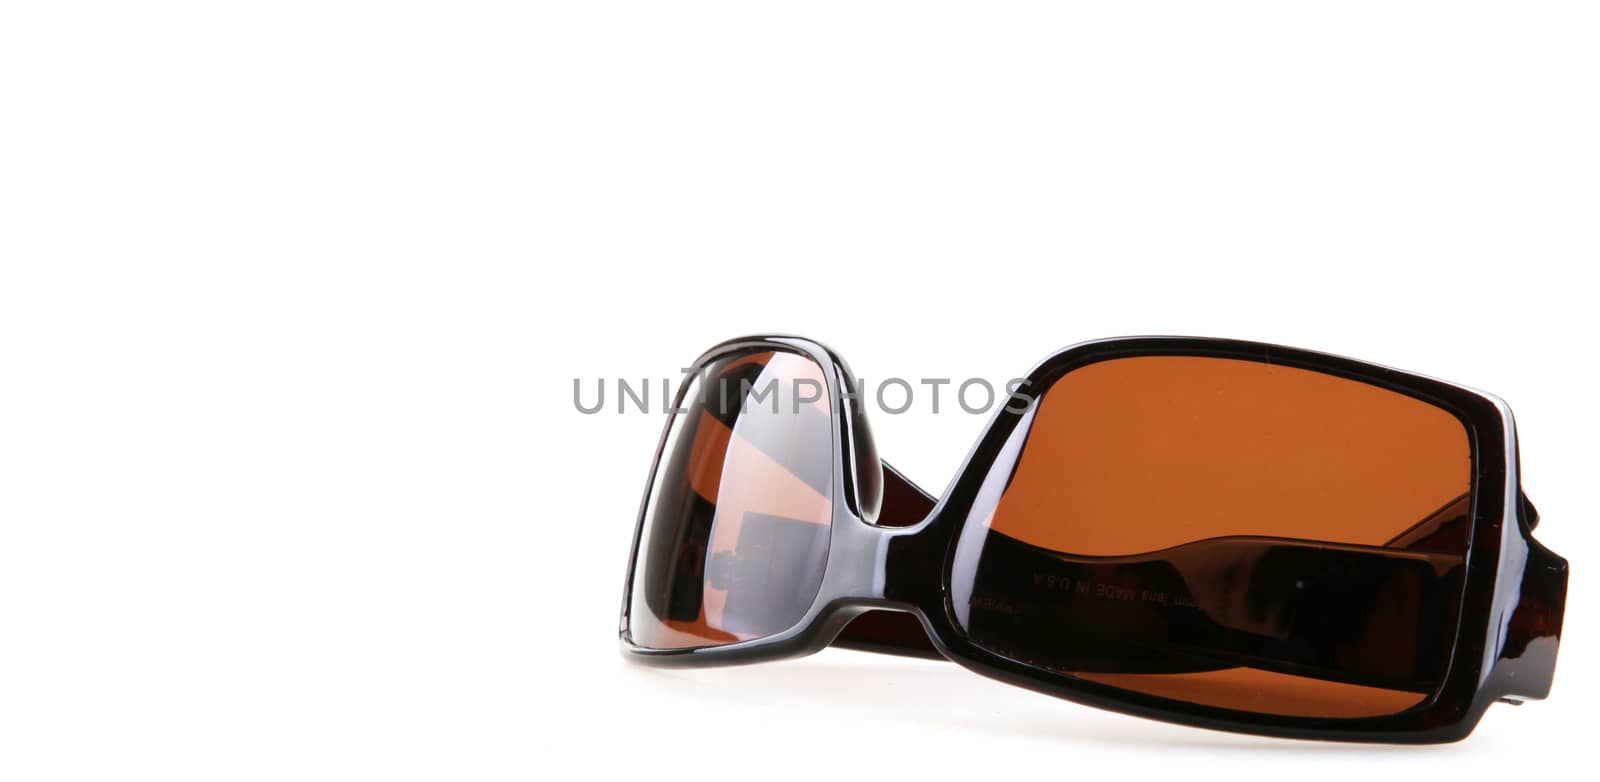 Sunglasses Isolated On White Background by nenovbrothers